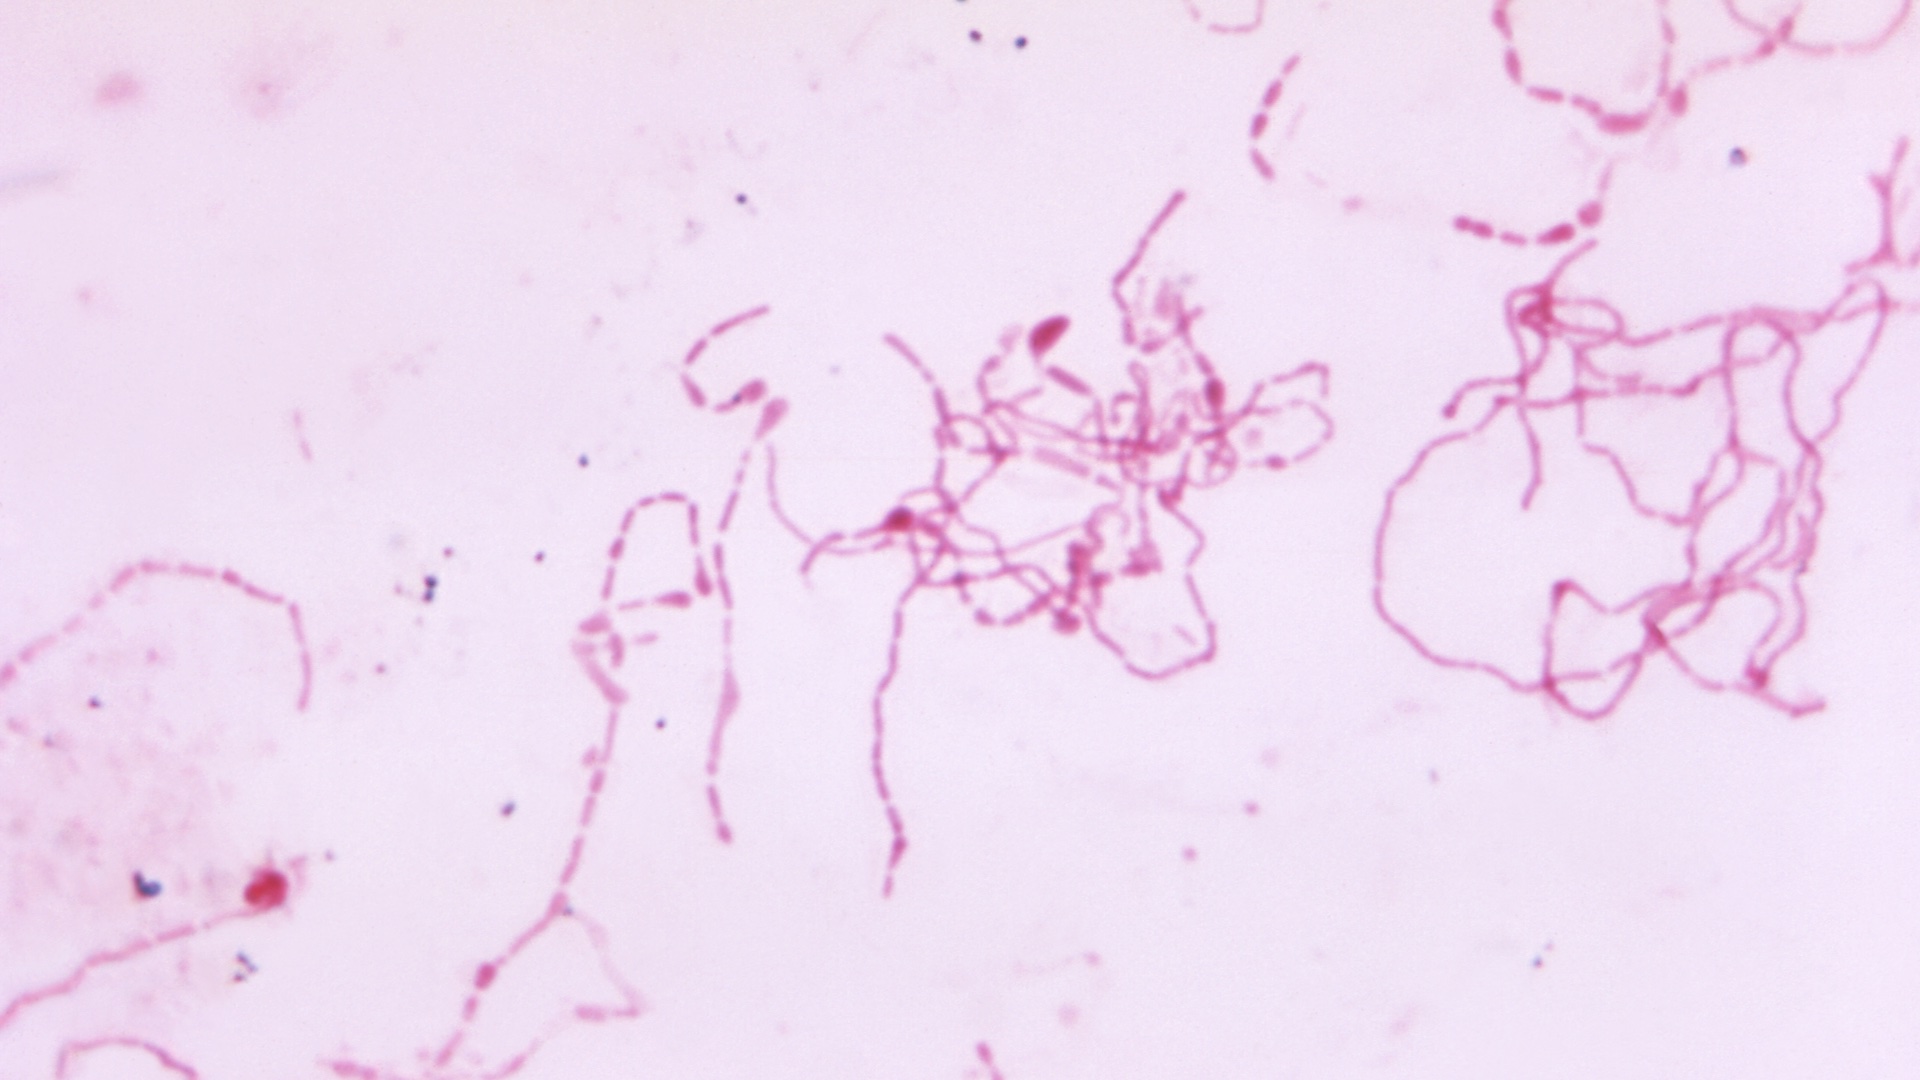 Photomicrograph of the rod-shaped bacterium Streptobacillus moniliformis, stained pink and magnified